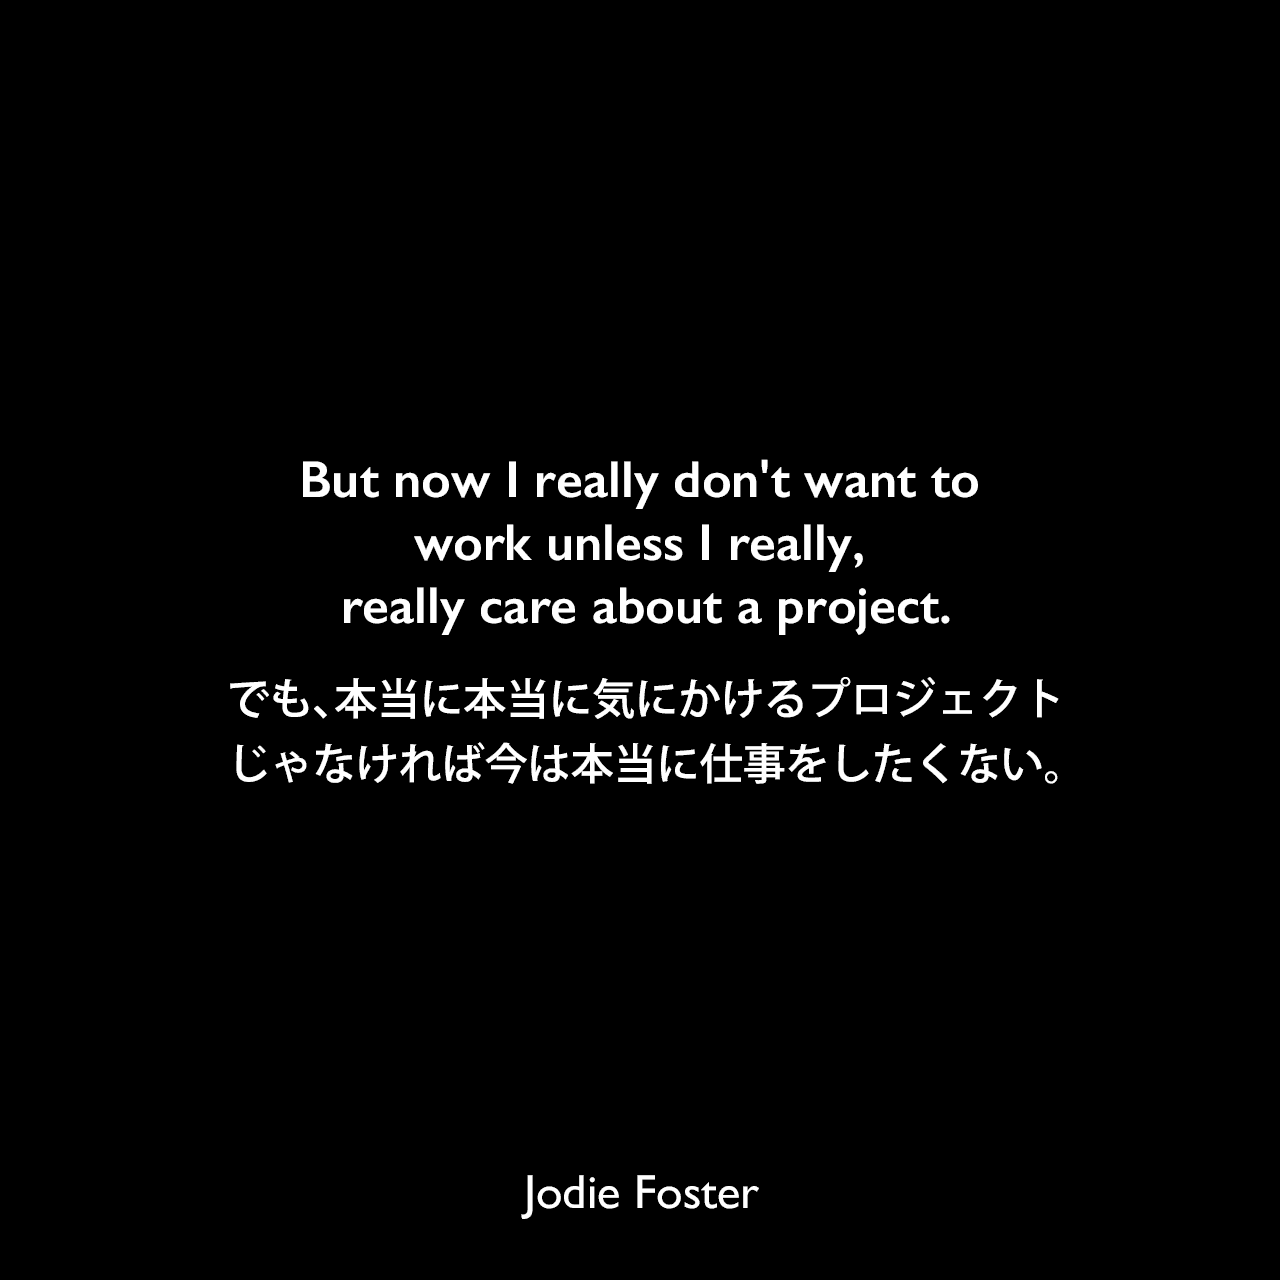 But now I really don't want to work unless I really, really care about a project.でも、本当に本当に気にかけるプロジェクトじゃなければ今は本当に仕事をしたくない。Jodie Foster